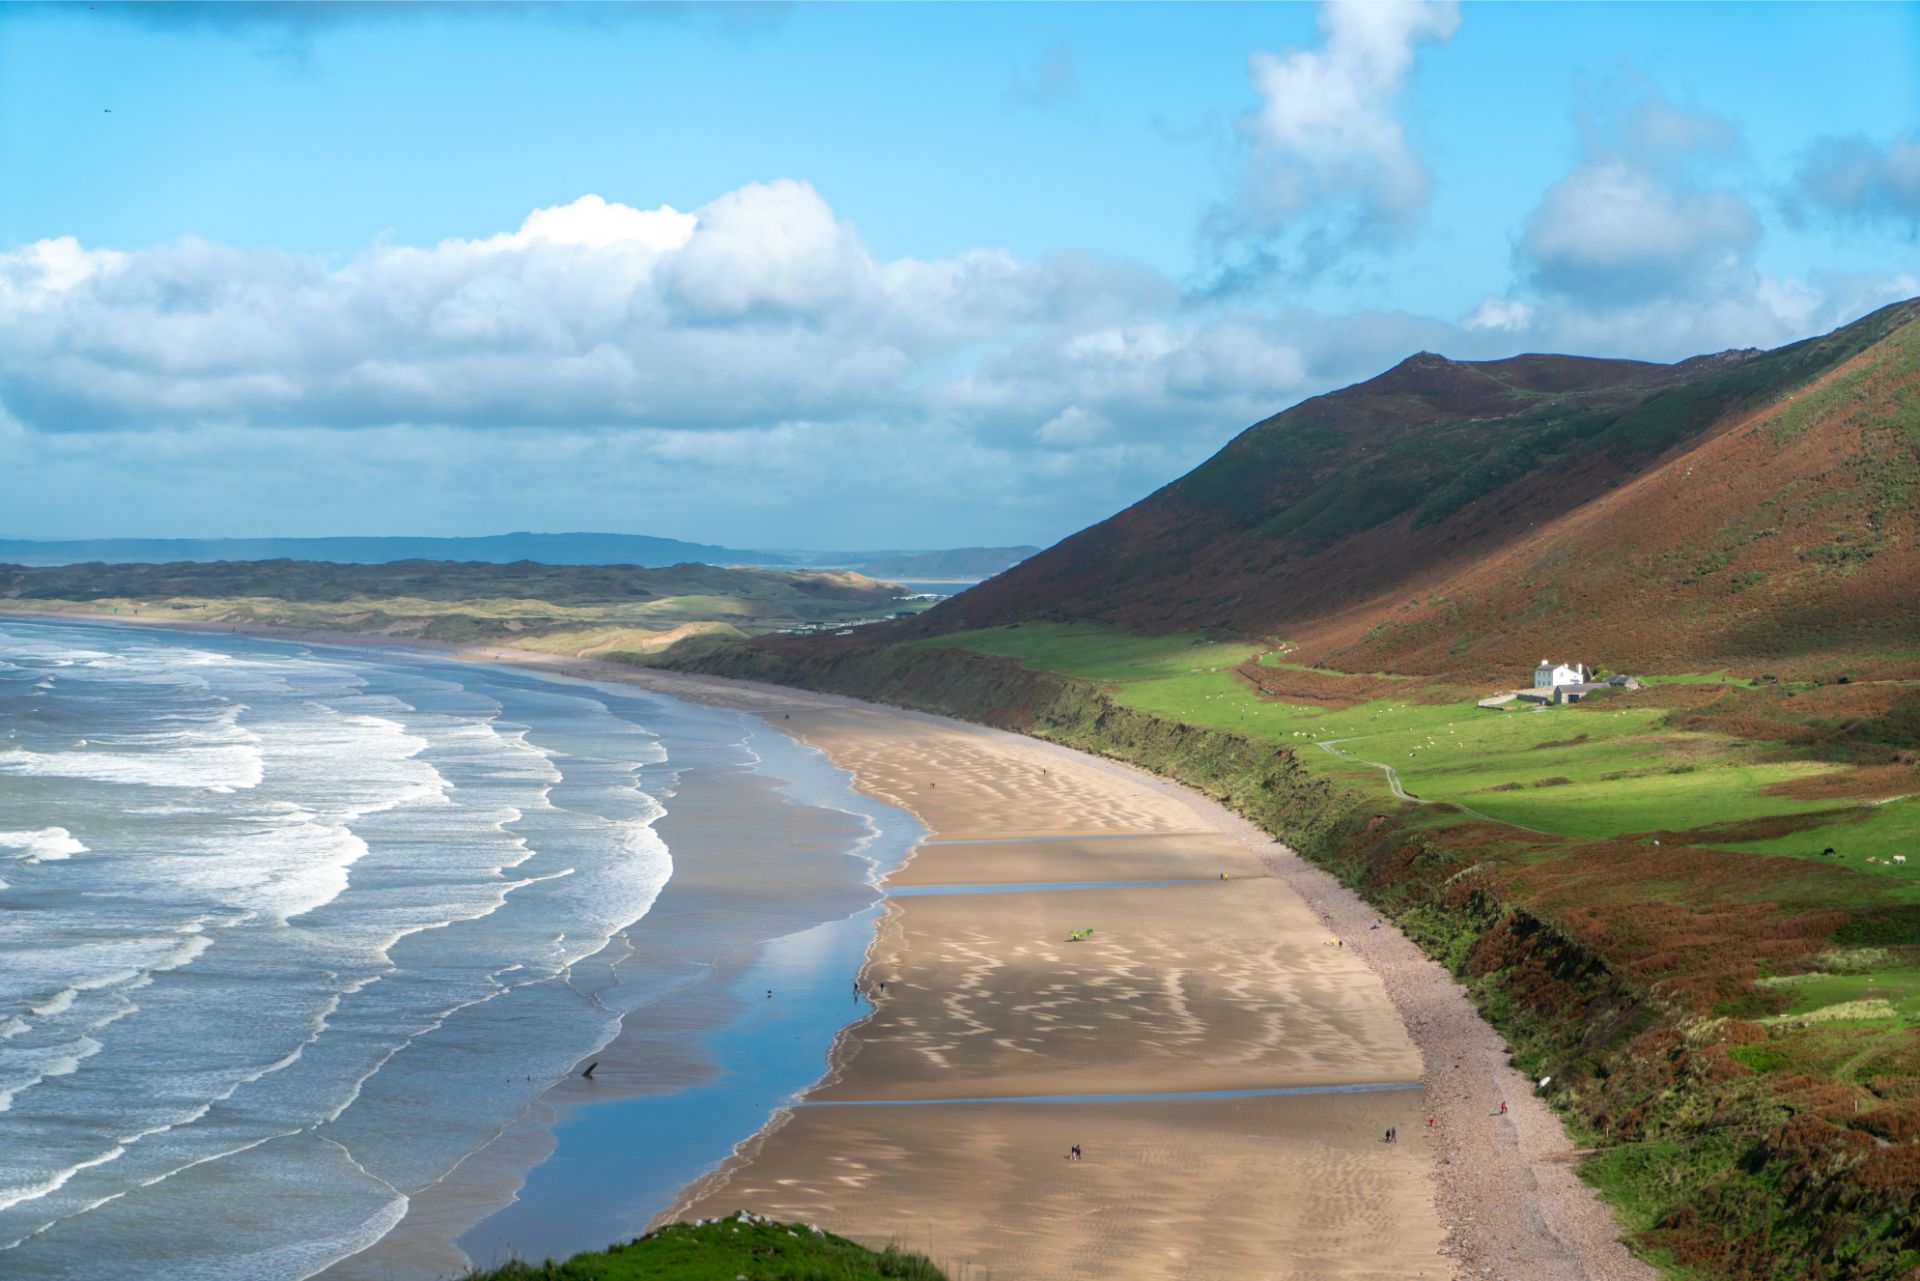 light-hitting-the-coast-sea-and-beach-at-rhossili-bay-weekend-in-the-gower-swansea-bay-wales